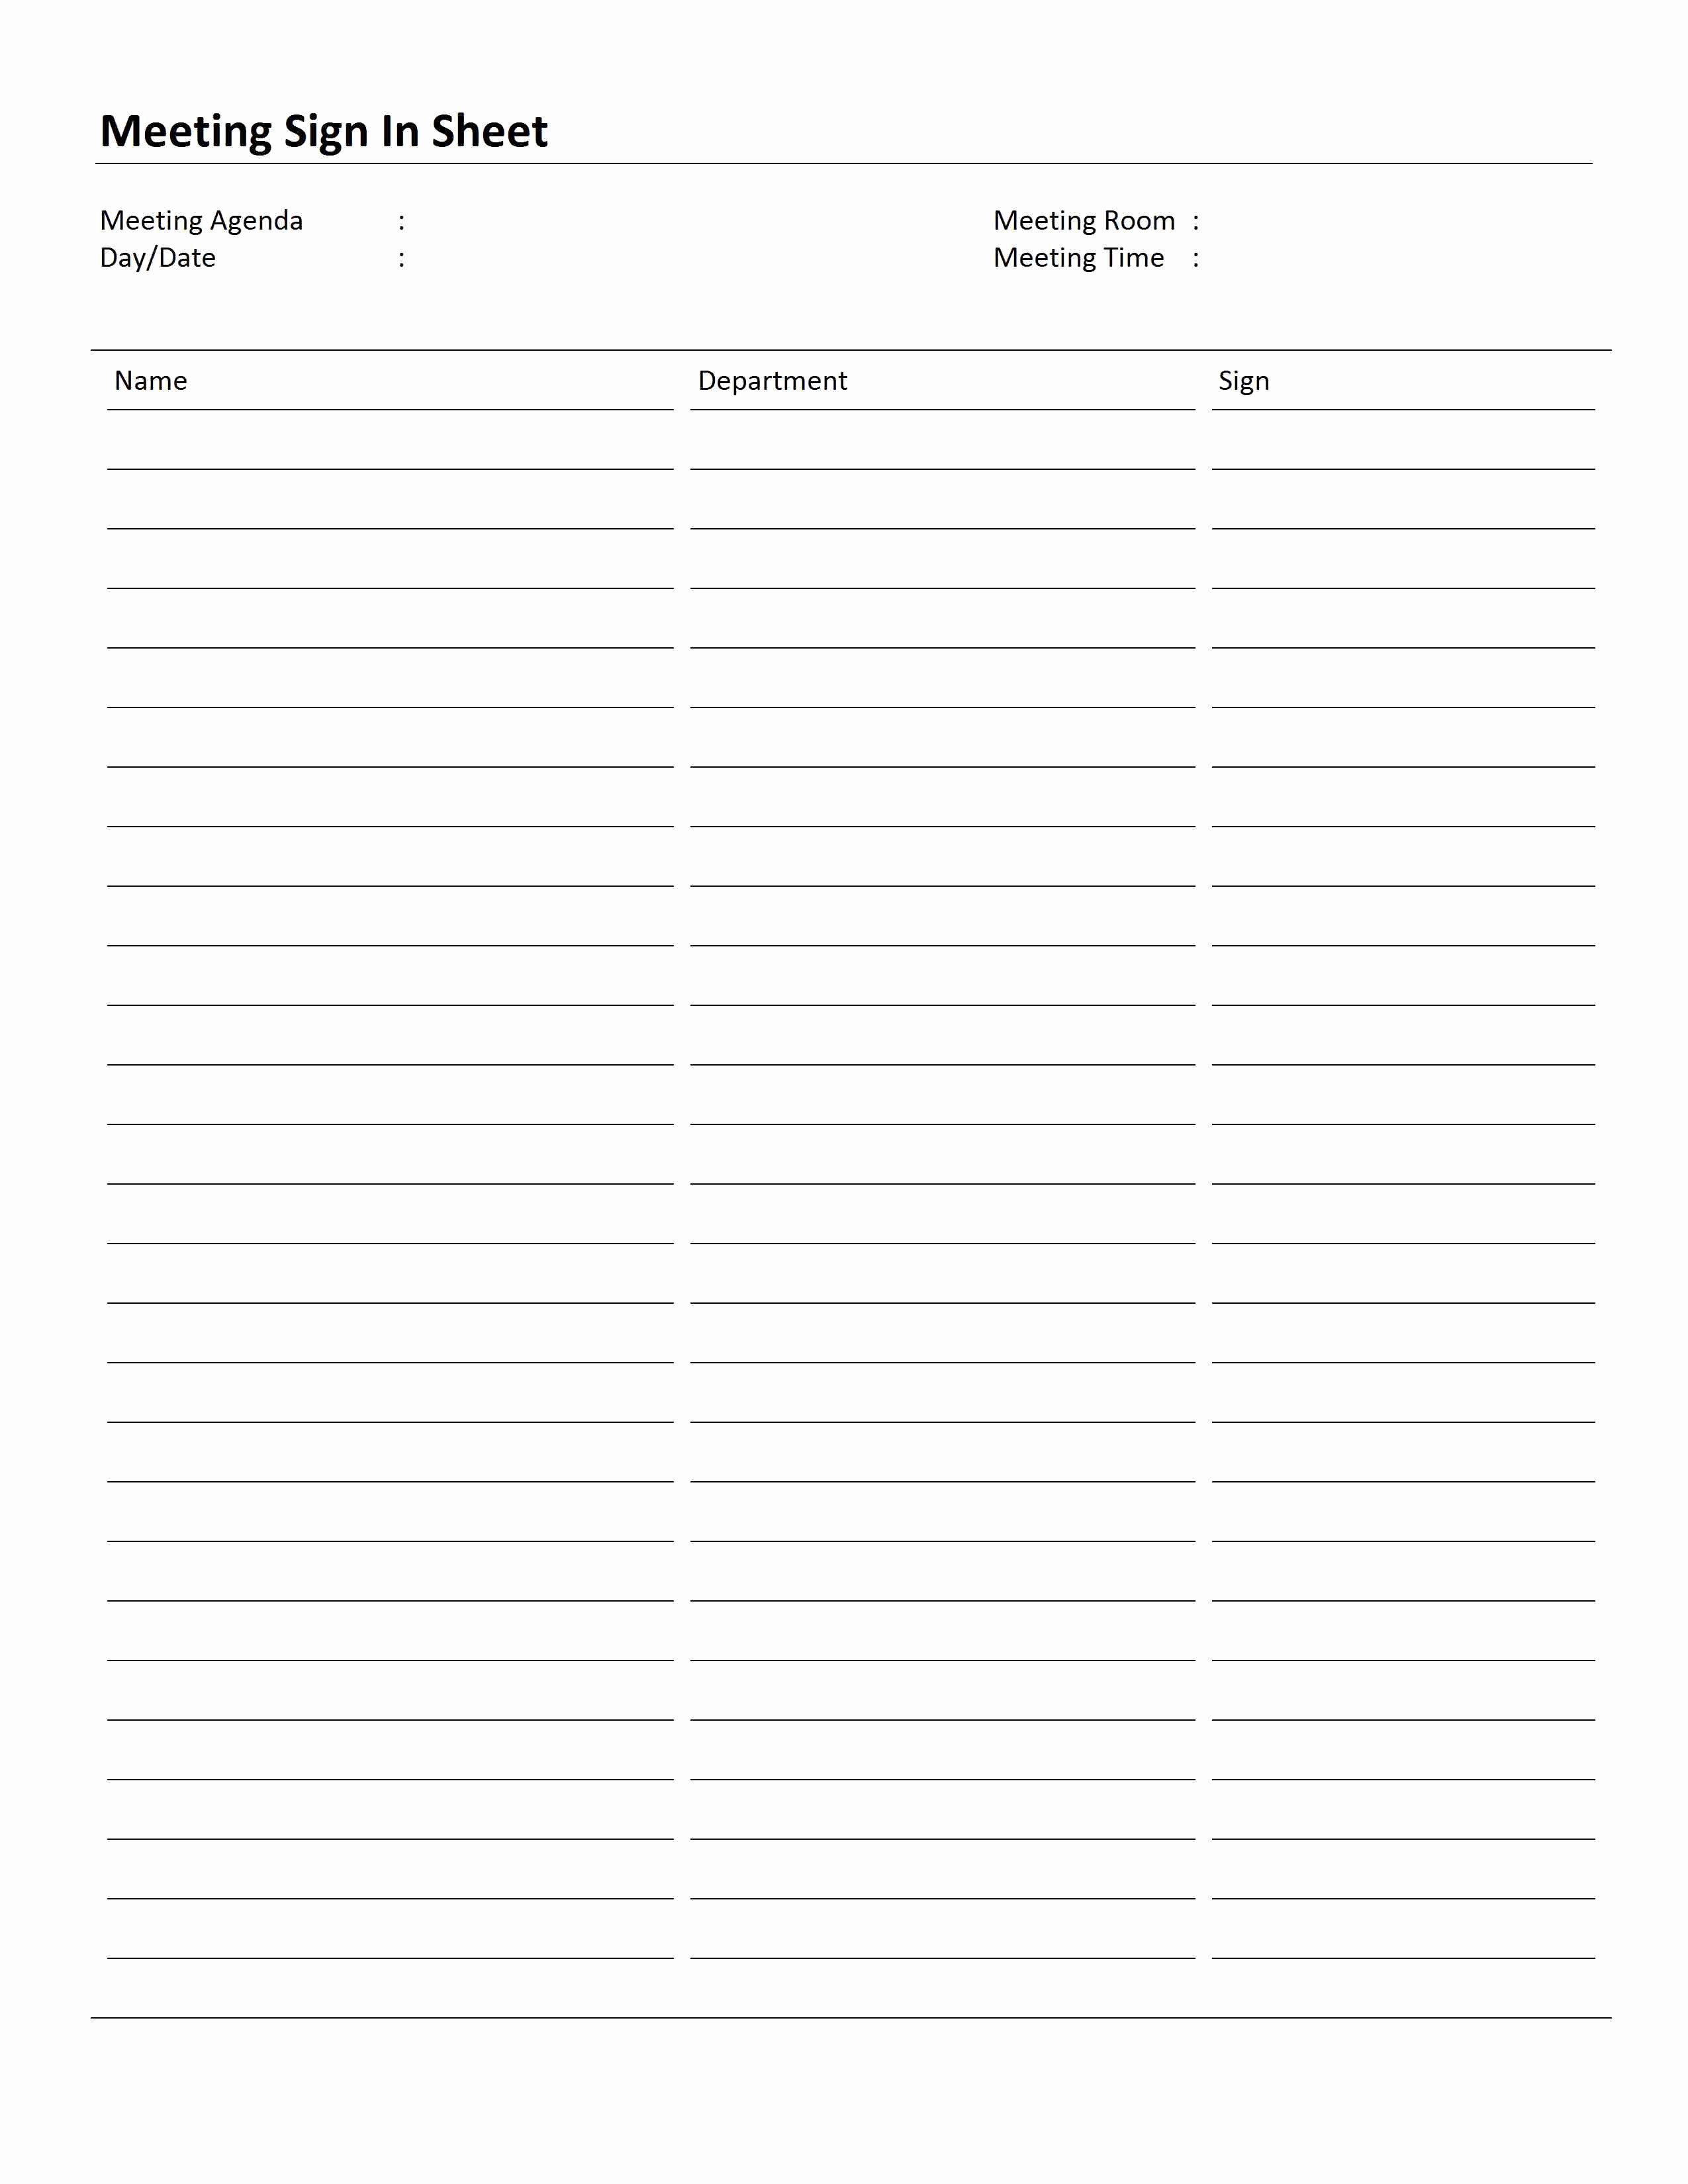 Appointment Sign In Sheet Template Best Of Meeting Sign In Sheet